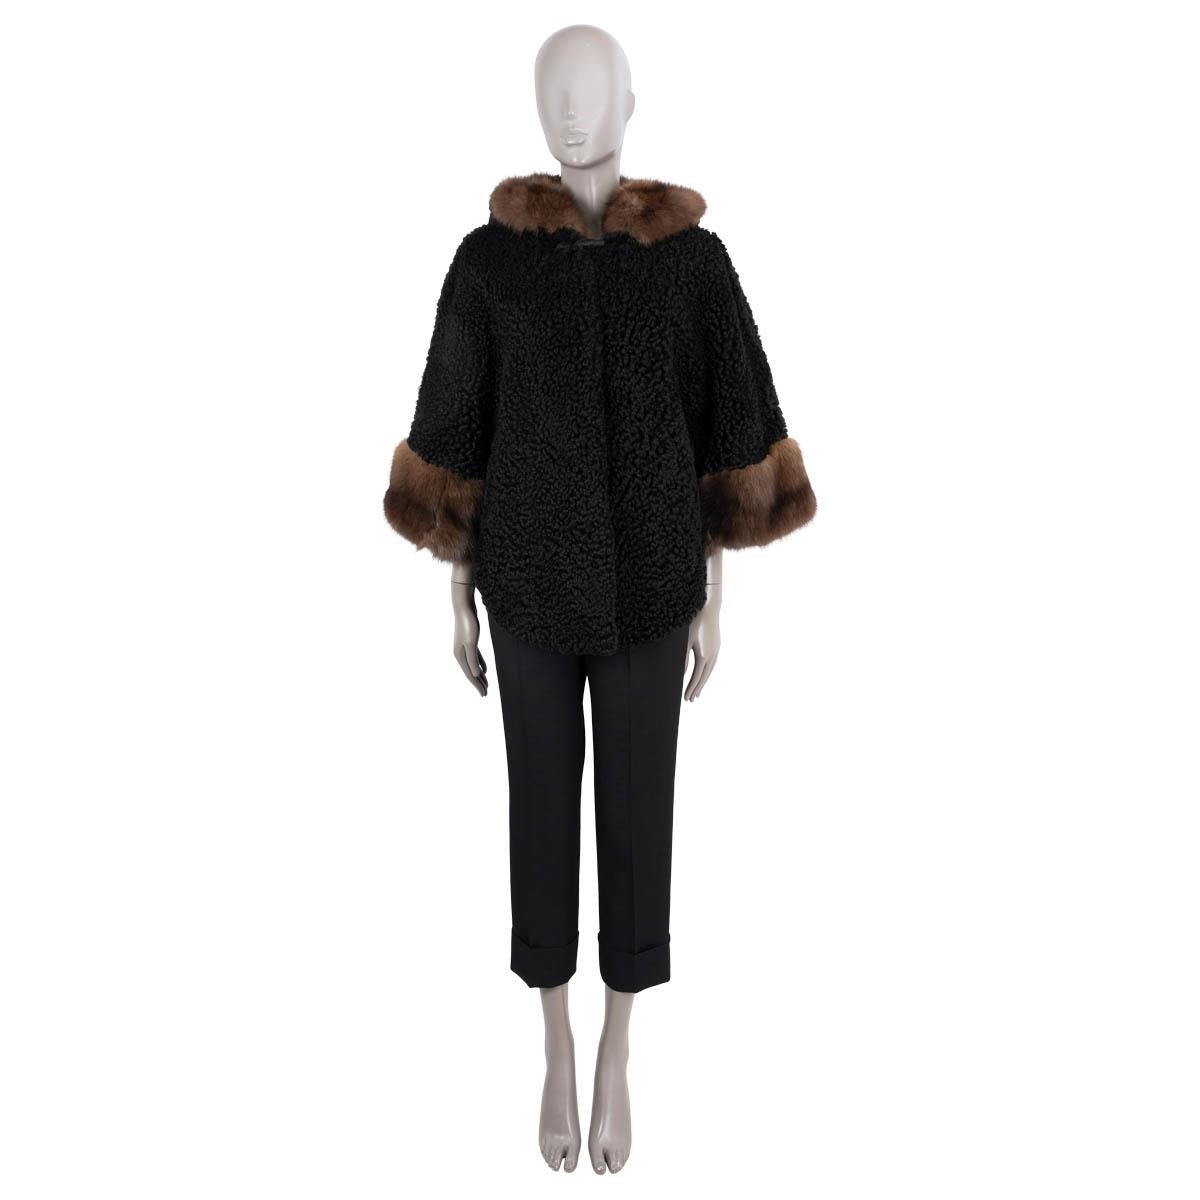 100% authentic Valentino hooded cape in black persian lamb. Features brown mink trim on the hood and cuffs, two pockets and 3/4 sleeves. Closes with a toggle and hook at the neck and is lined in leather. Has been worn and is in excellent